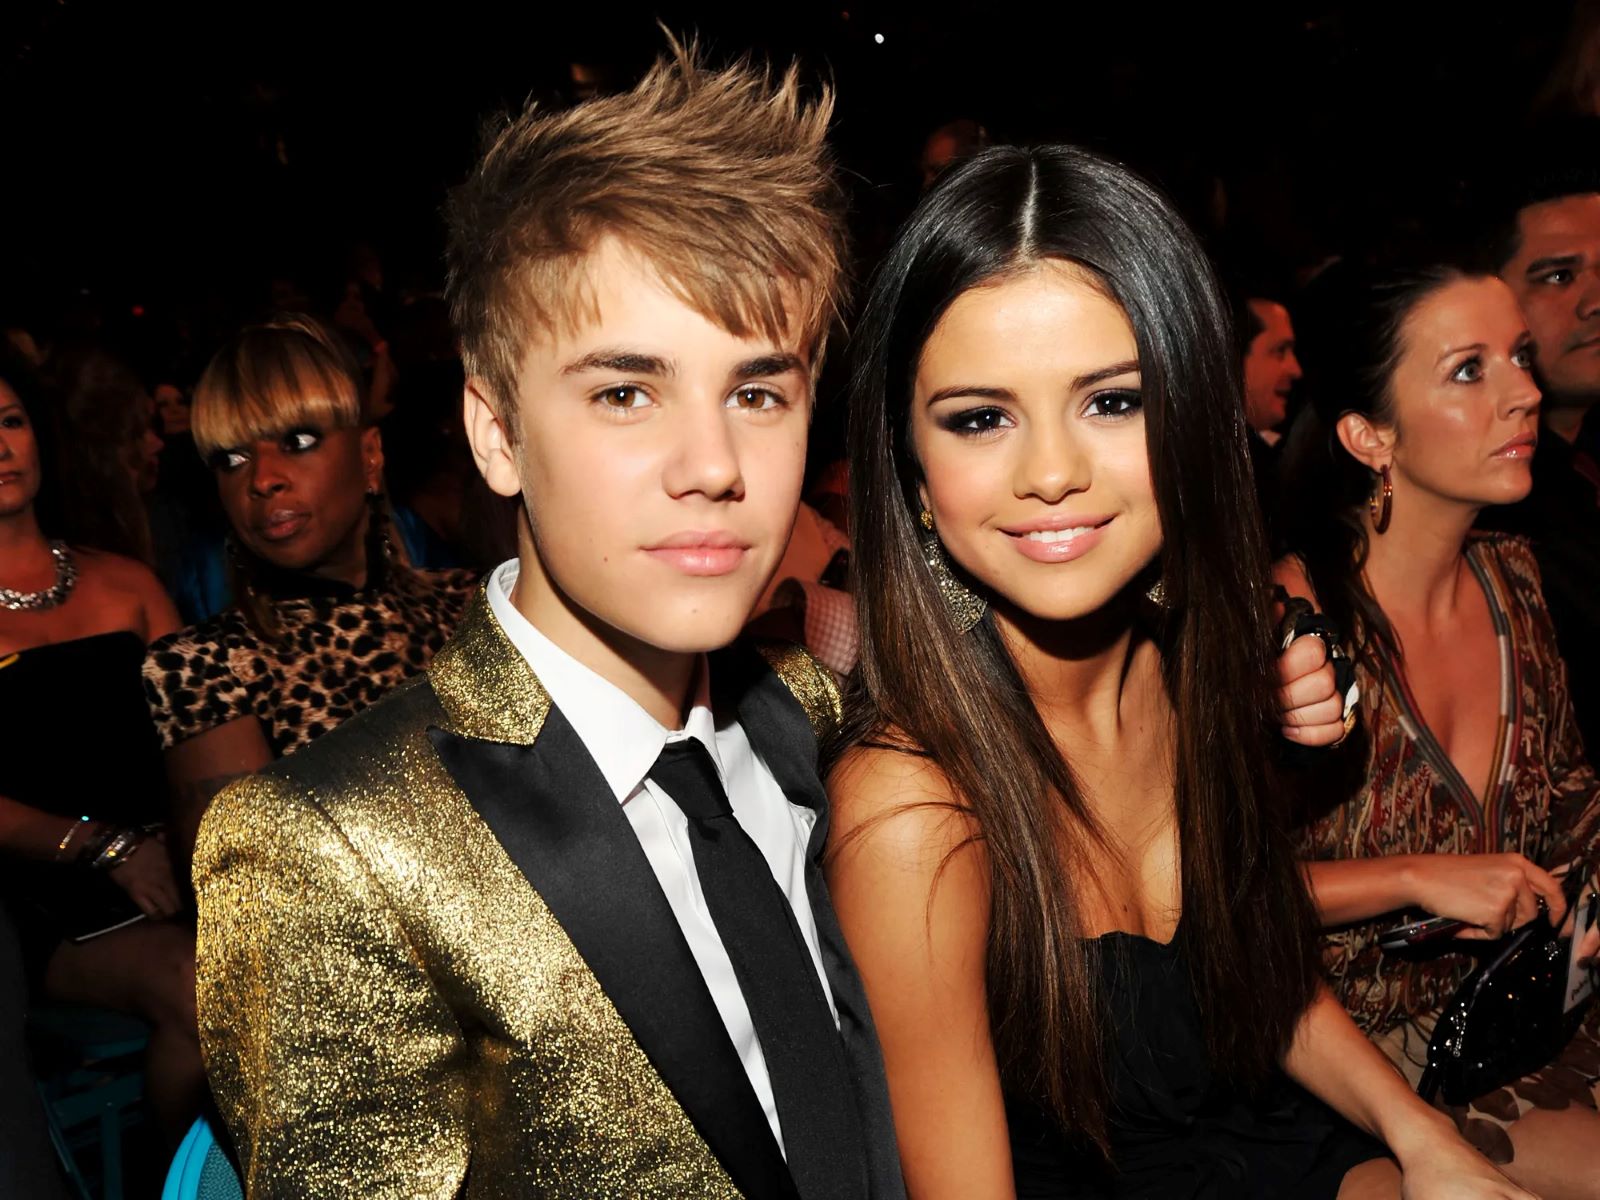 The Shocking Way Justin Bieber Ended His Marriage With Selena Gomez